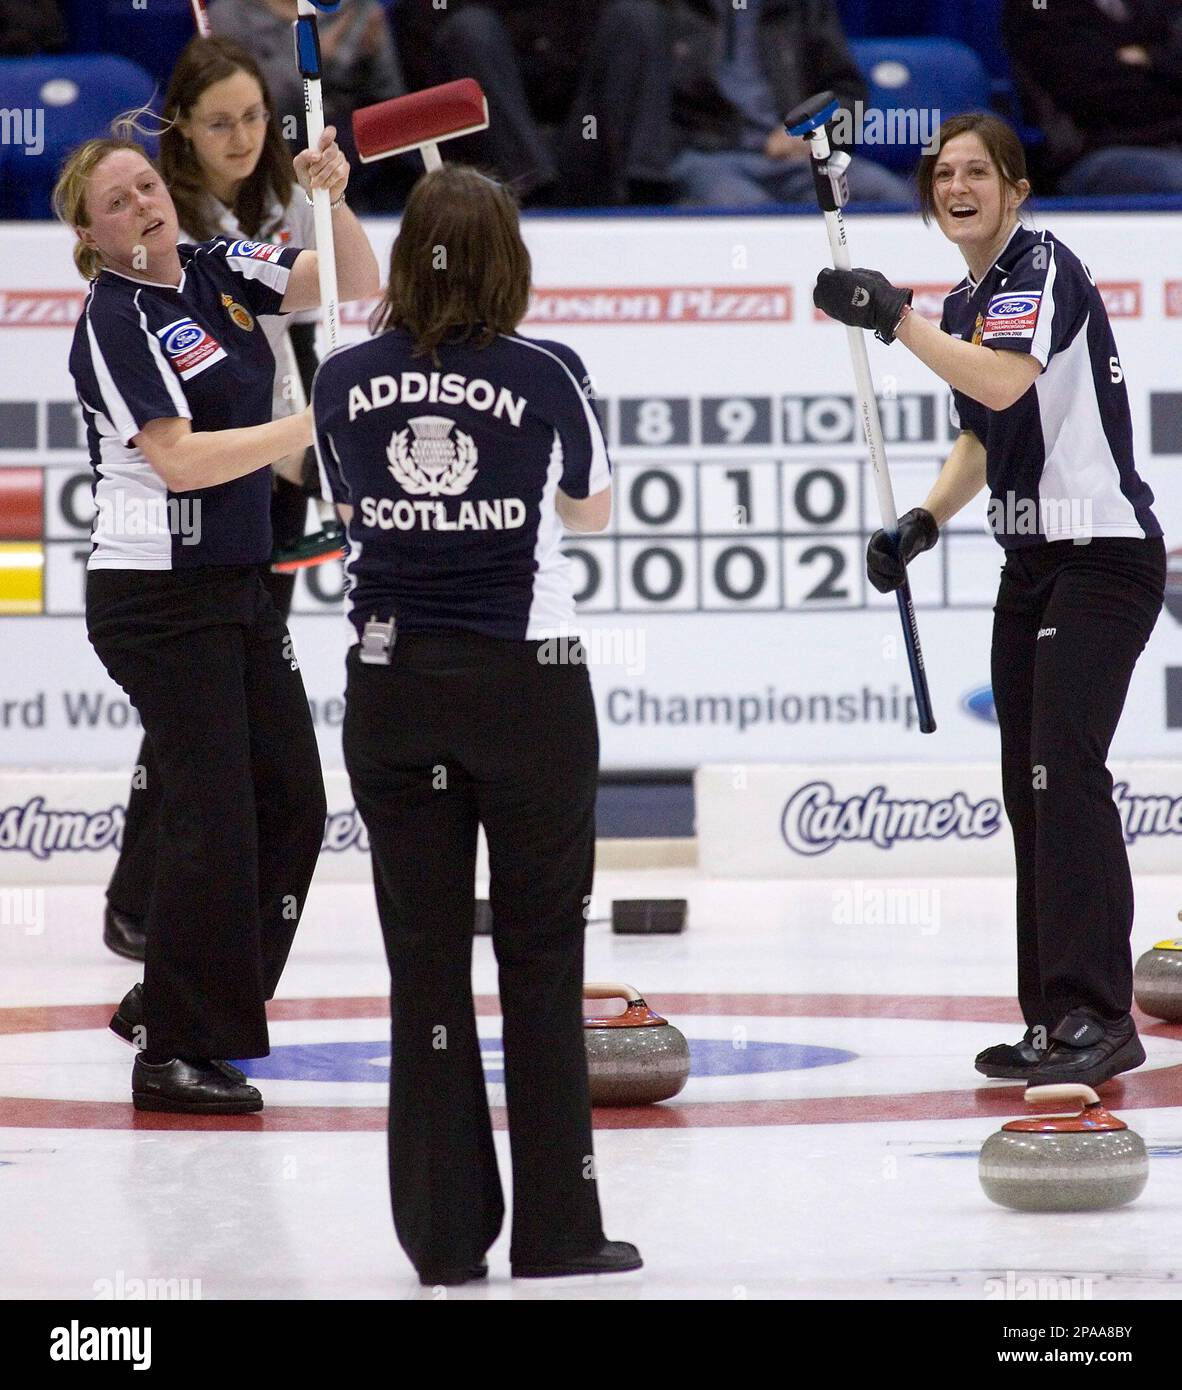 Team Scotland's skip Karen Addison, center, watches her final shot as alternate Lynn Cameron, right, and lead Anne Laird, left, celebrate their 5-4 win over Team Italy at the Women's World Curling Championships in Vernon, British Columbia, Canada, Thursday, March 27, 2008. Team Italy's skip Diana Gaspari, back second from left, looks on. (AP Photo/The Canadian Press, Jeff Bassett) Stock Photo